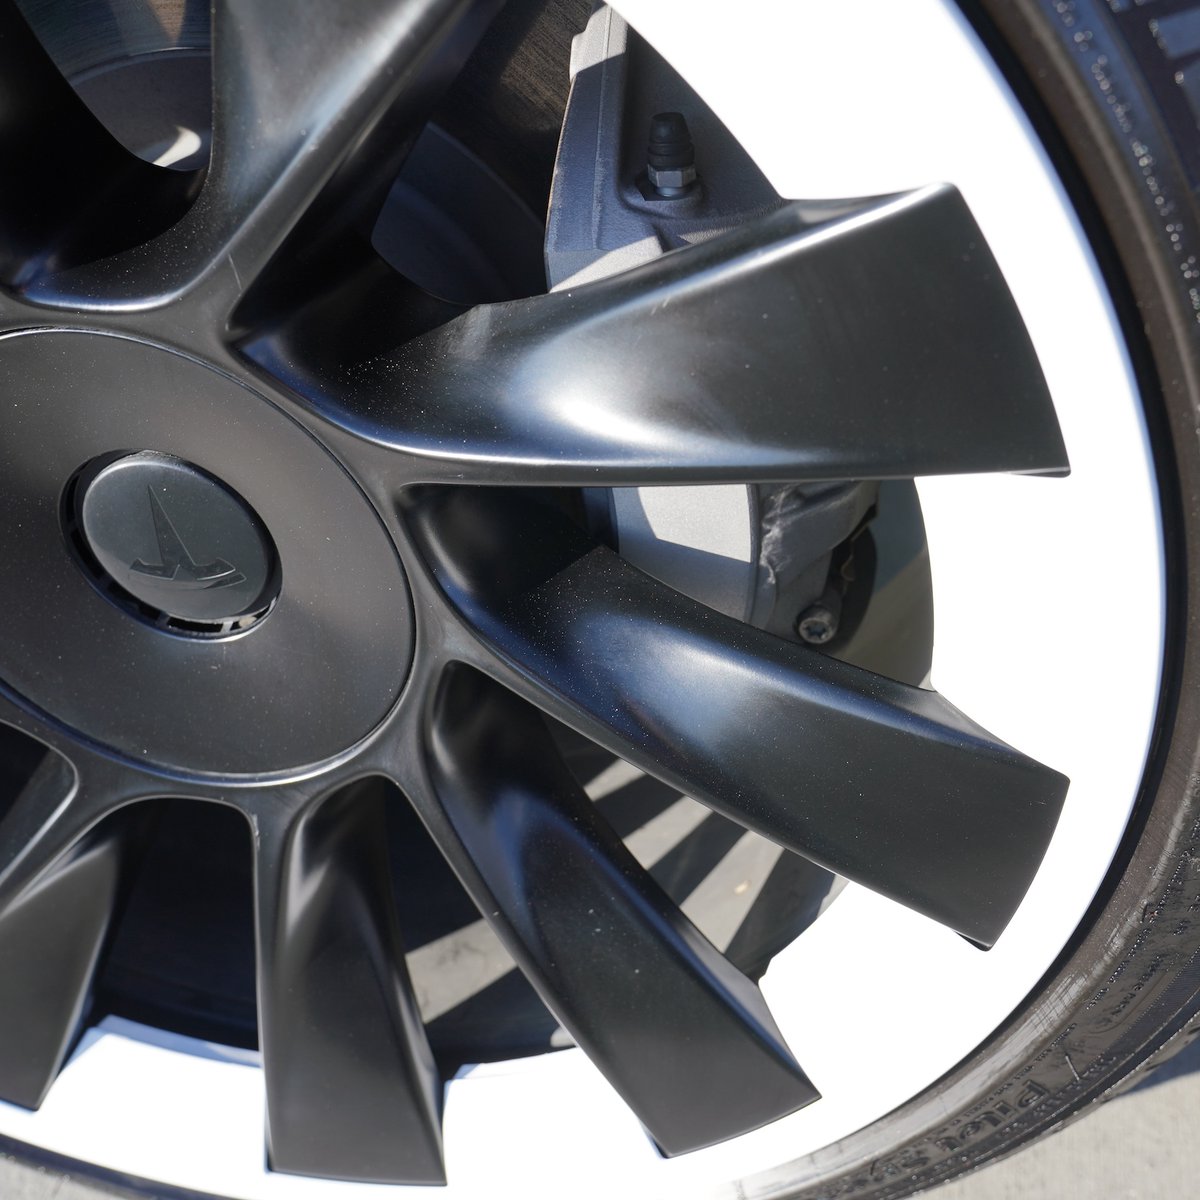 📢TESPLUS New Arrival is here! 🚀 Designed for Tesla Model Y 20'' Induction wheels. The TESPLUS Wheel Cover Rim Protectors will protect your original wheels from curb rash and give you a fresh looking to your Model Y! Shop now at TESPLUS.COM